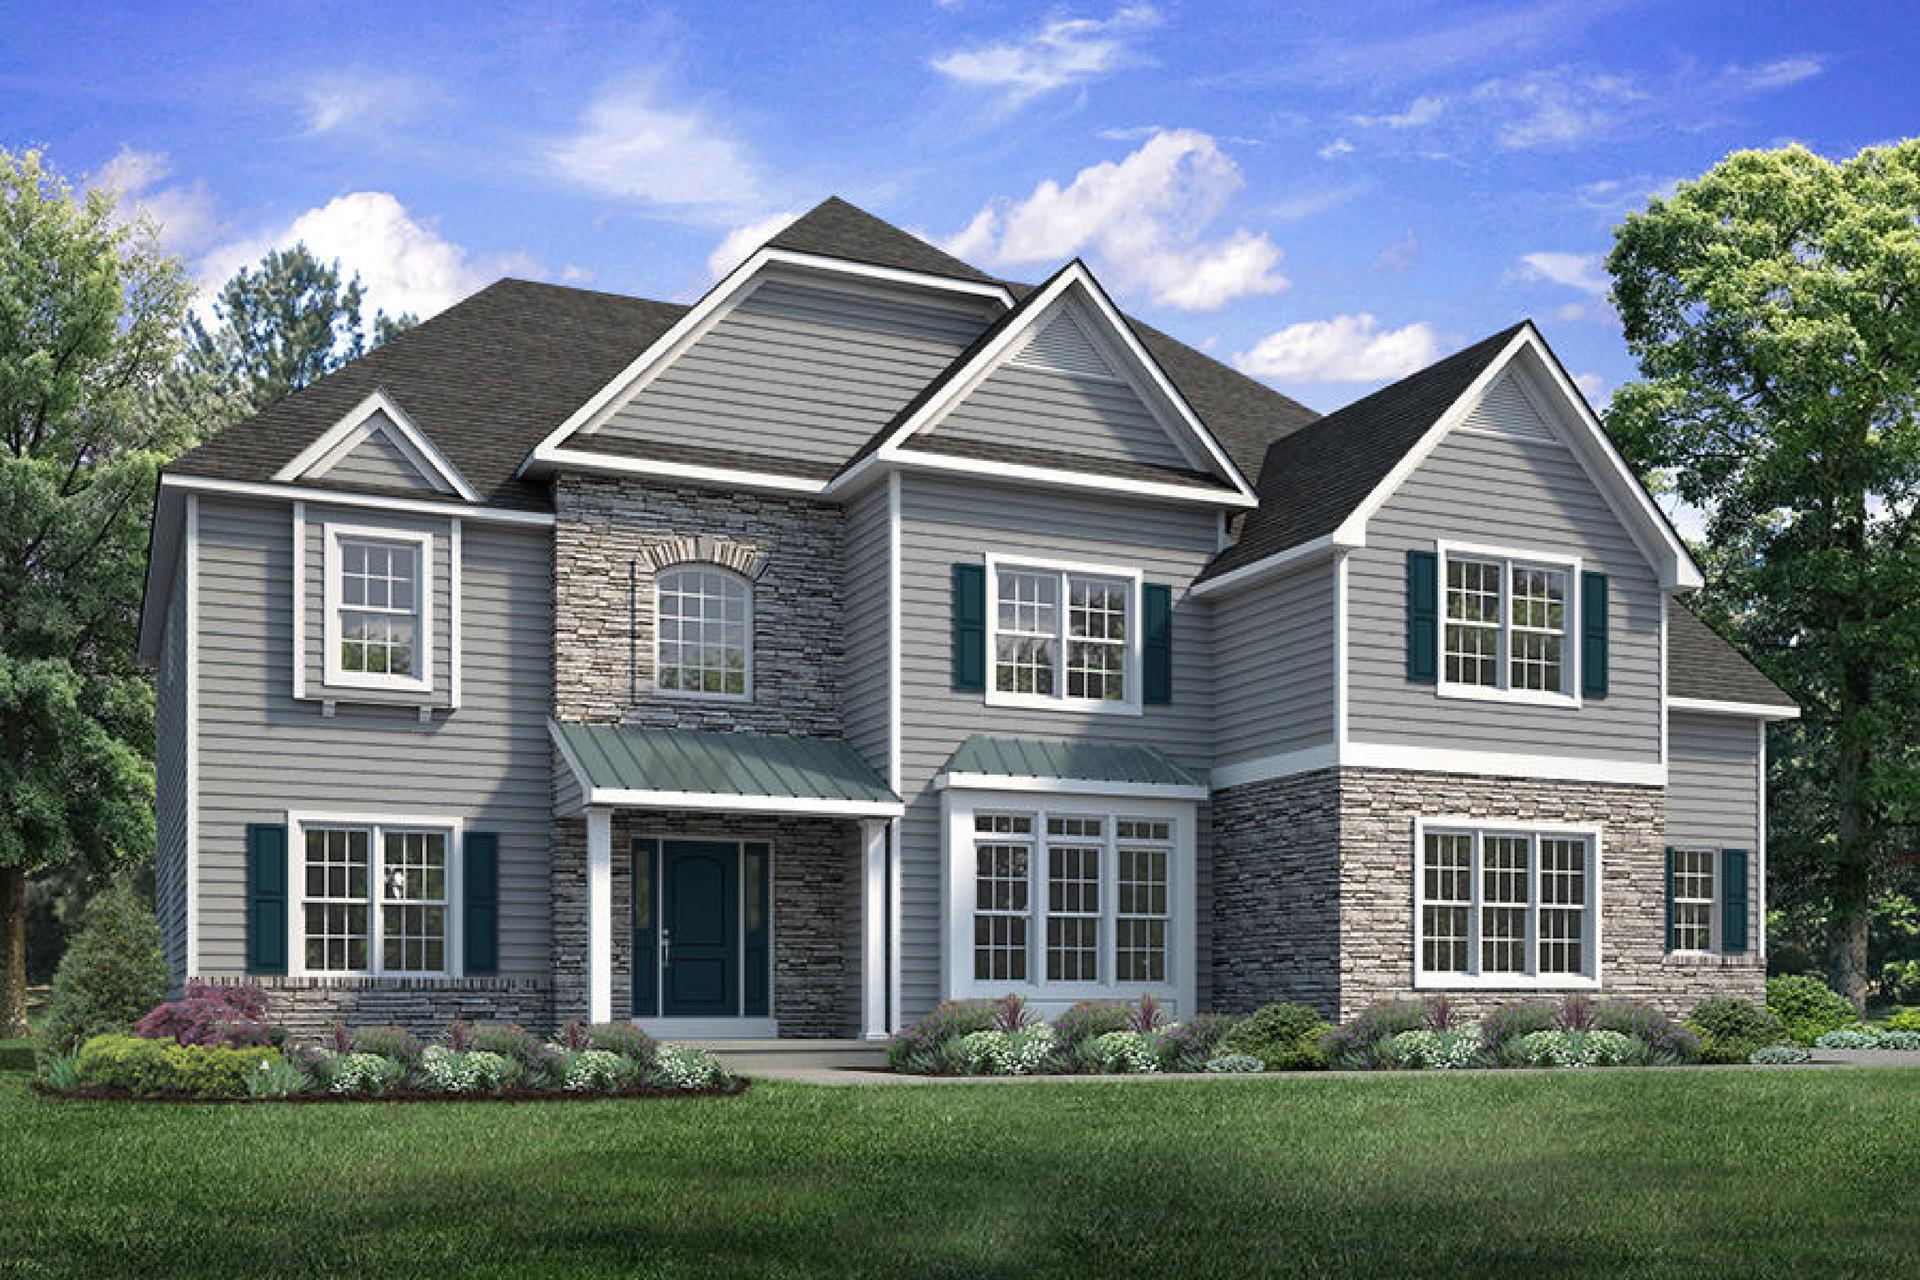 The Preakness New Home in Center Valley PA - Estates at Saucon Valley